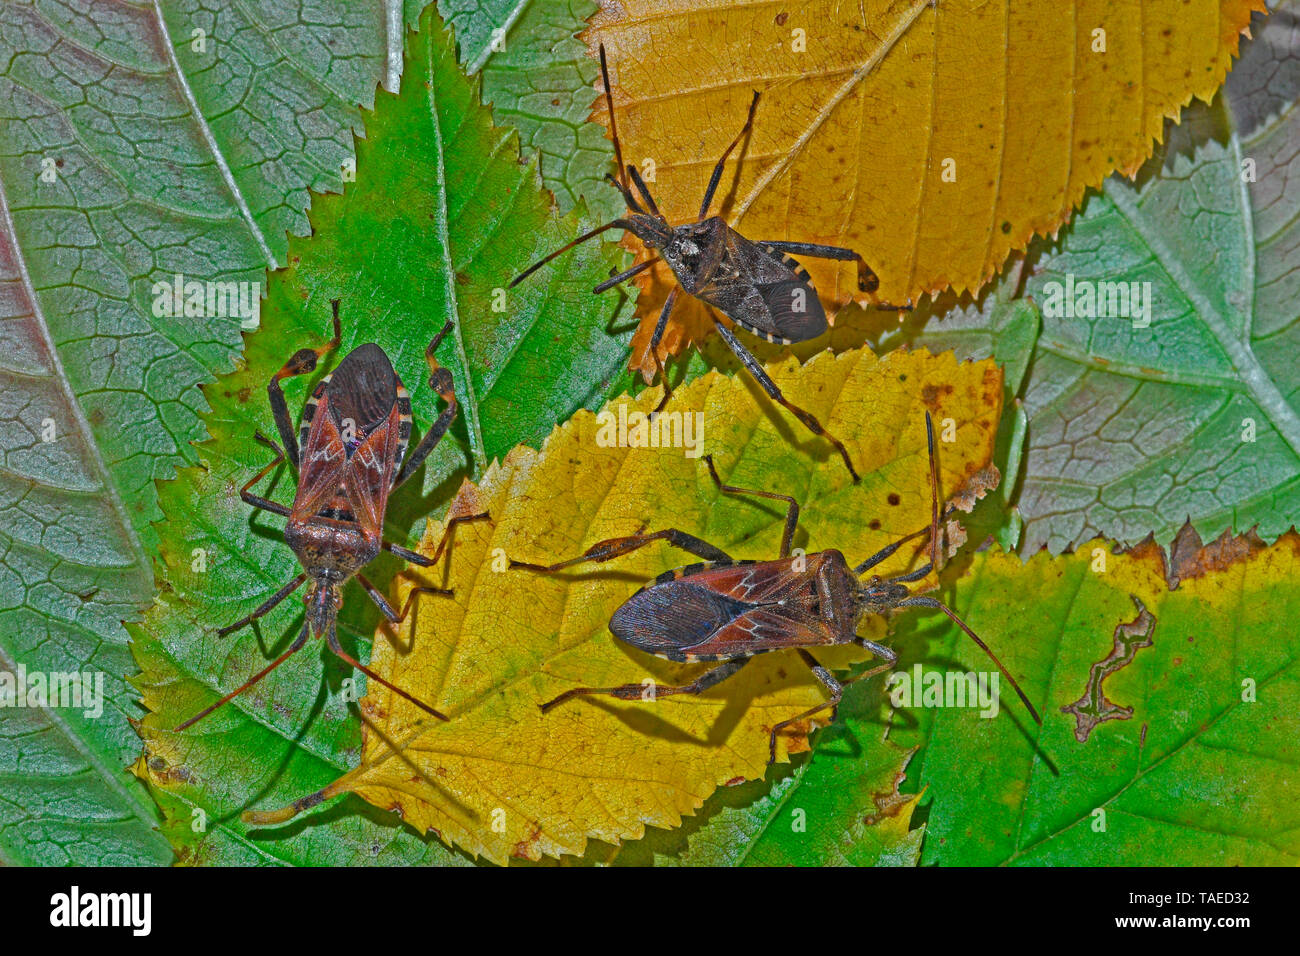 Western conifer seed bugs (Leptoglossus occidentalis) on leaves, Invasive species, Auvergne, France Stock Photo